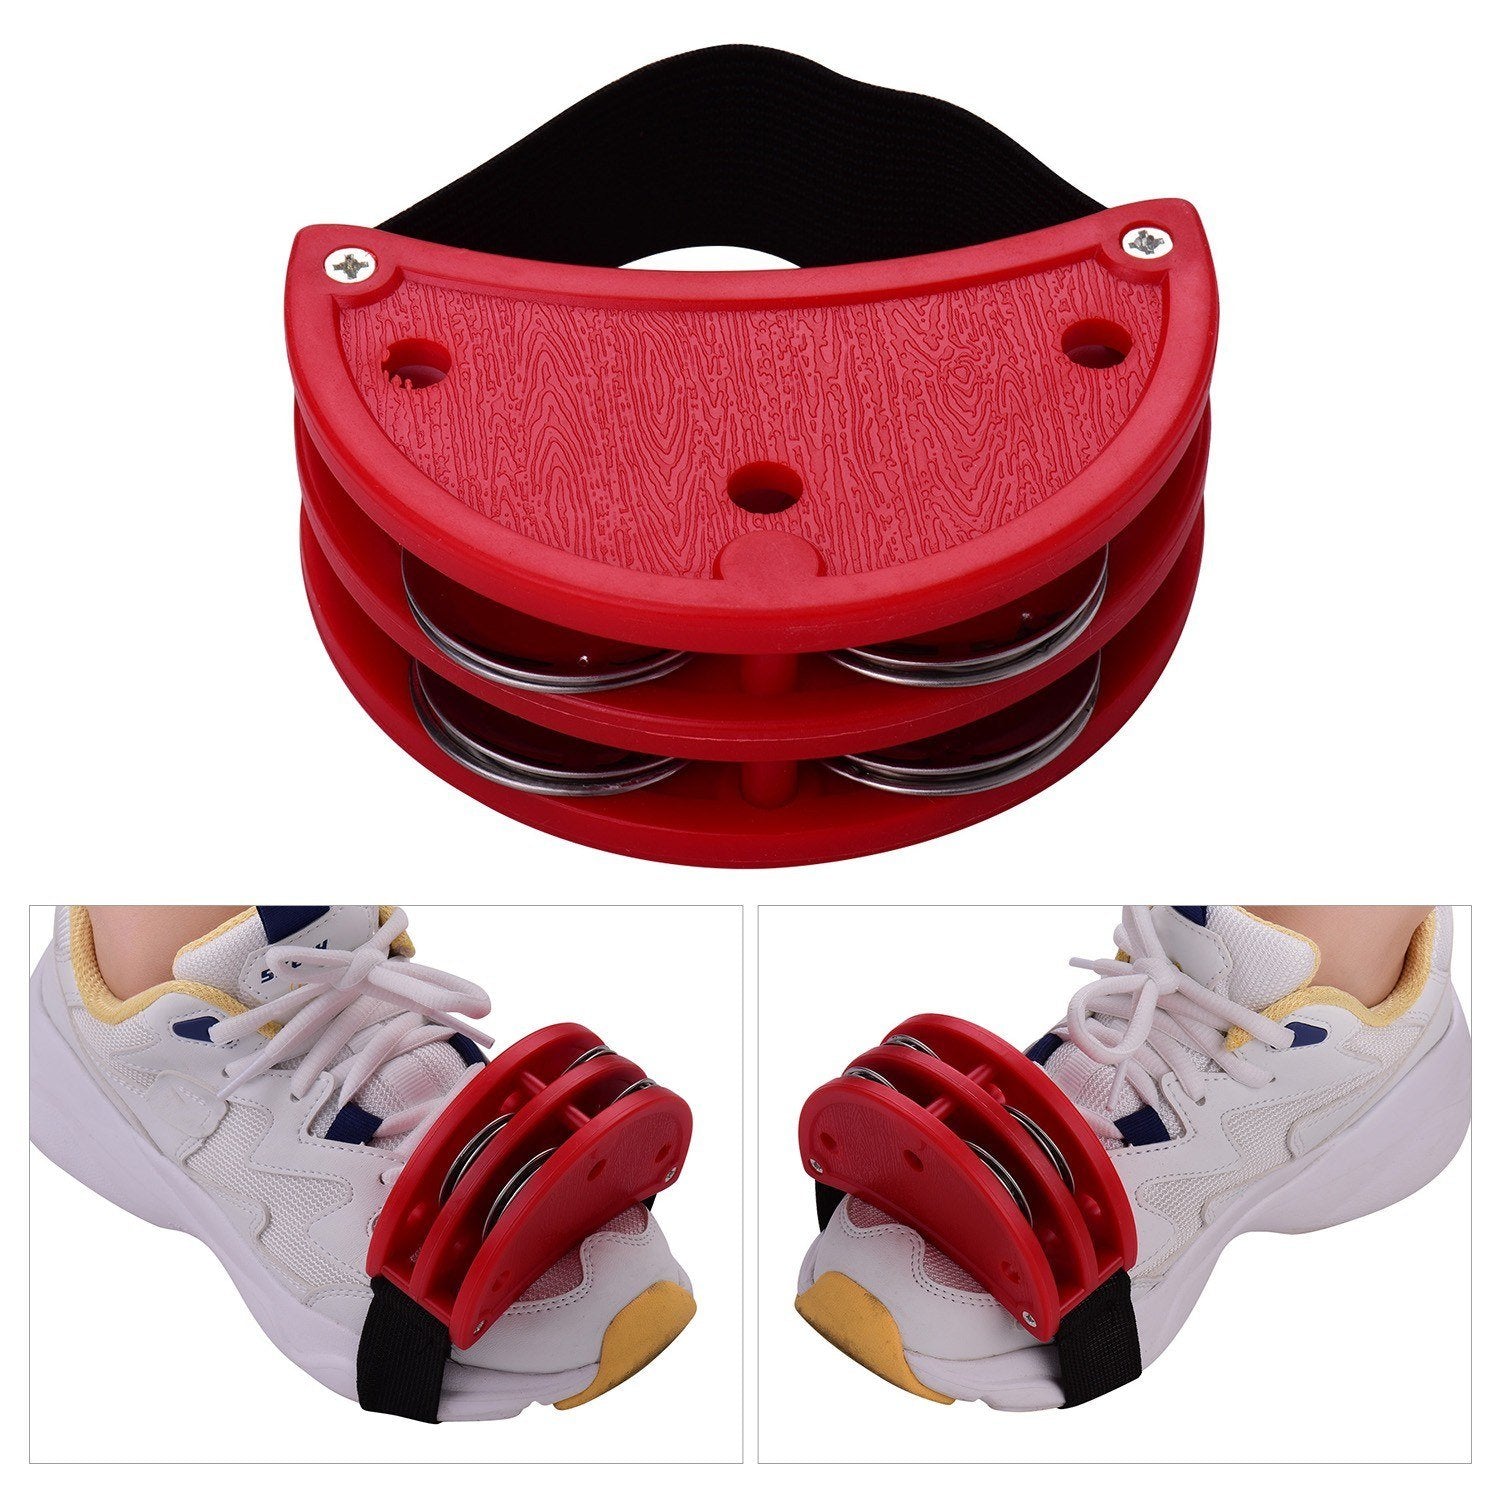 ABS Foot Jingle Tambourine Percussion Instrument Accessories with Stainless Steel Bell for Musicians Singers